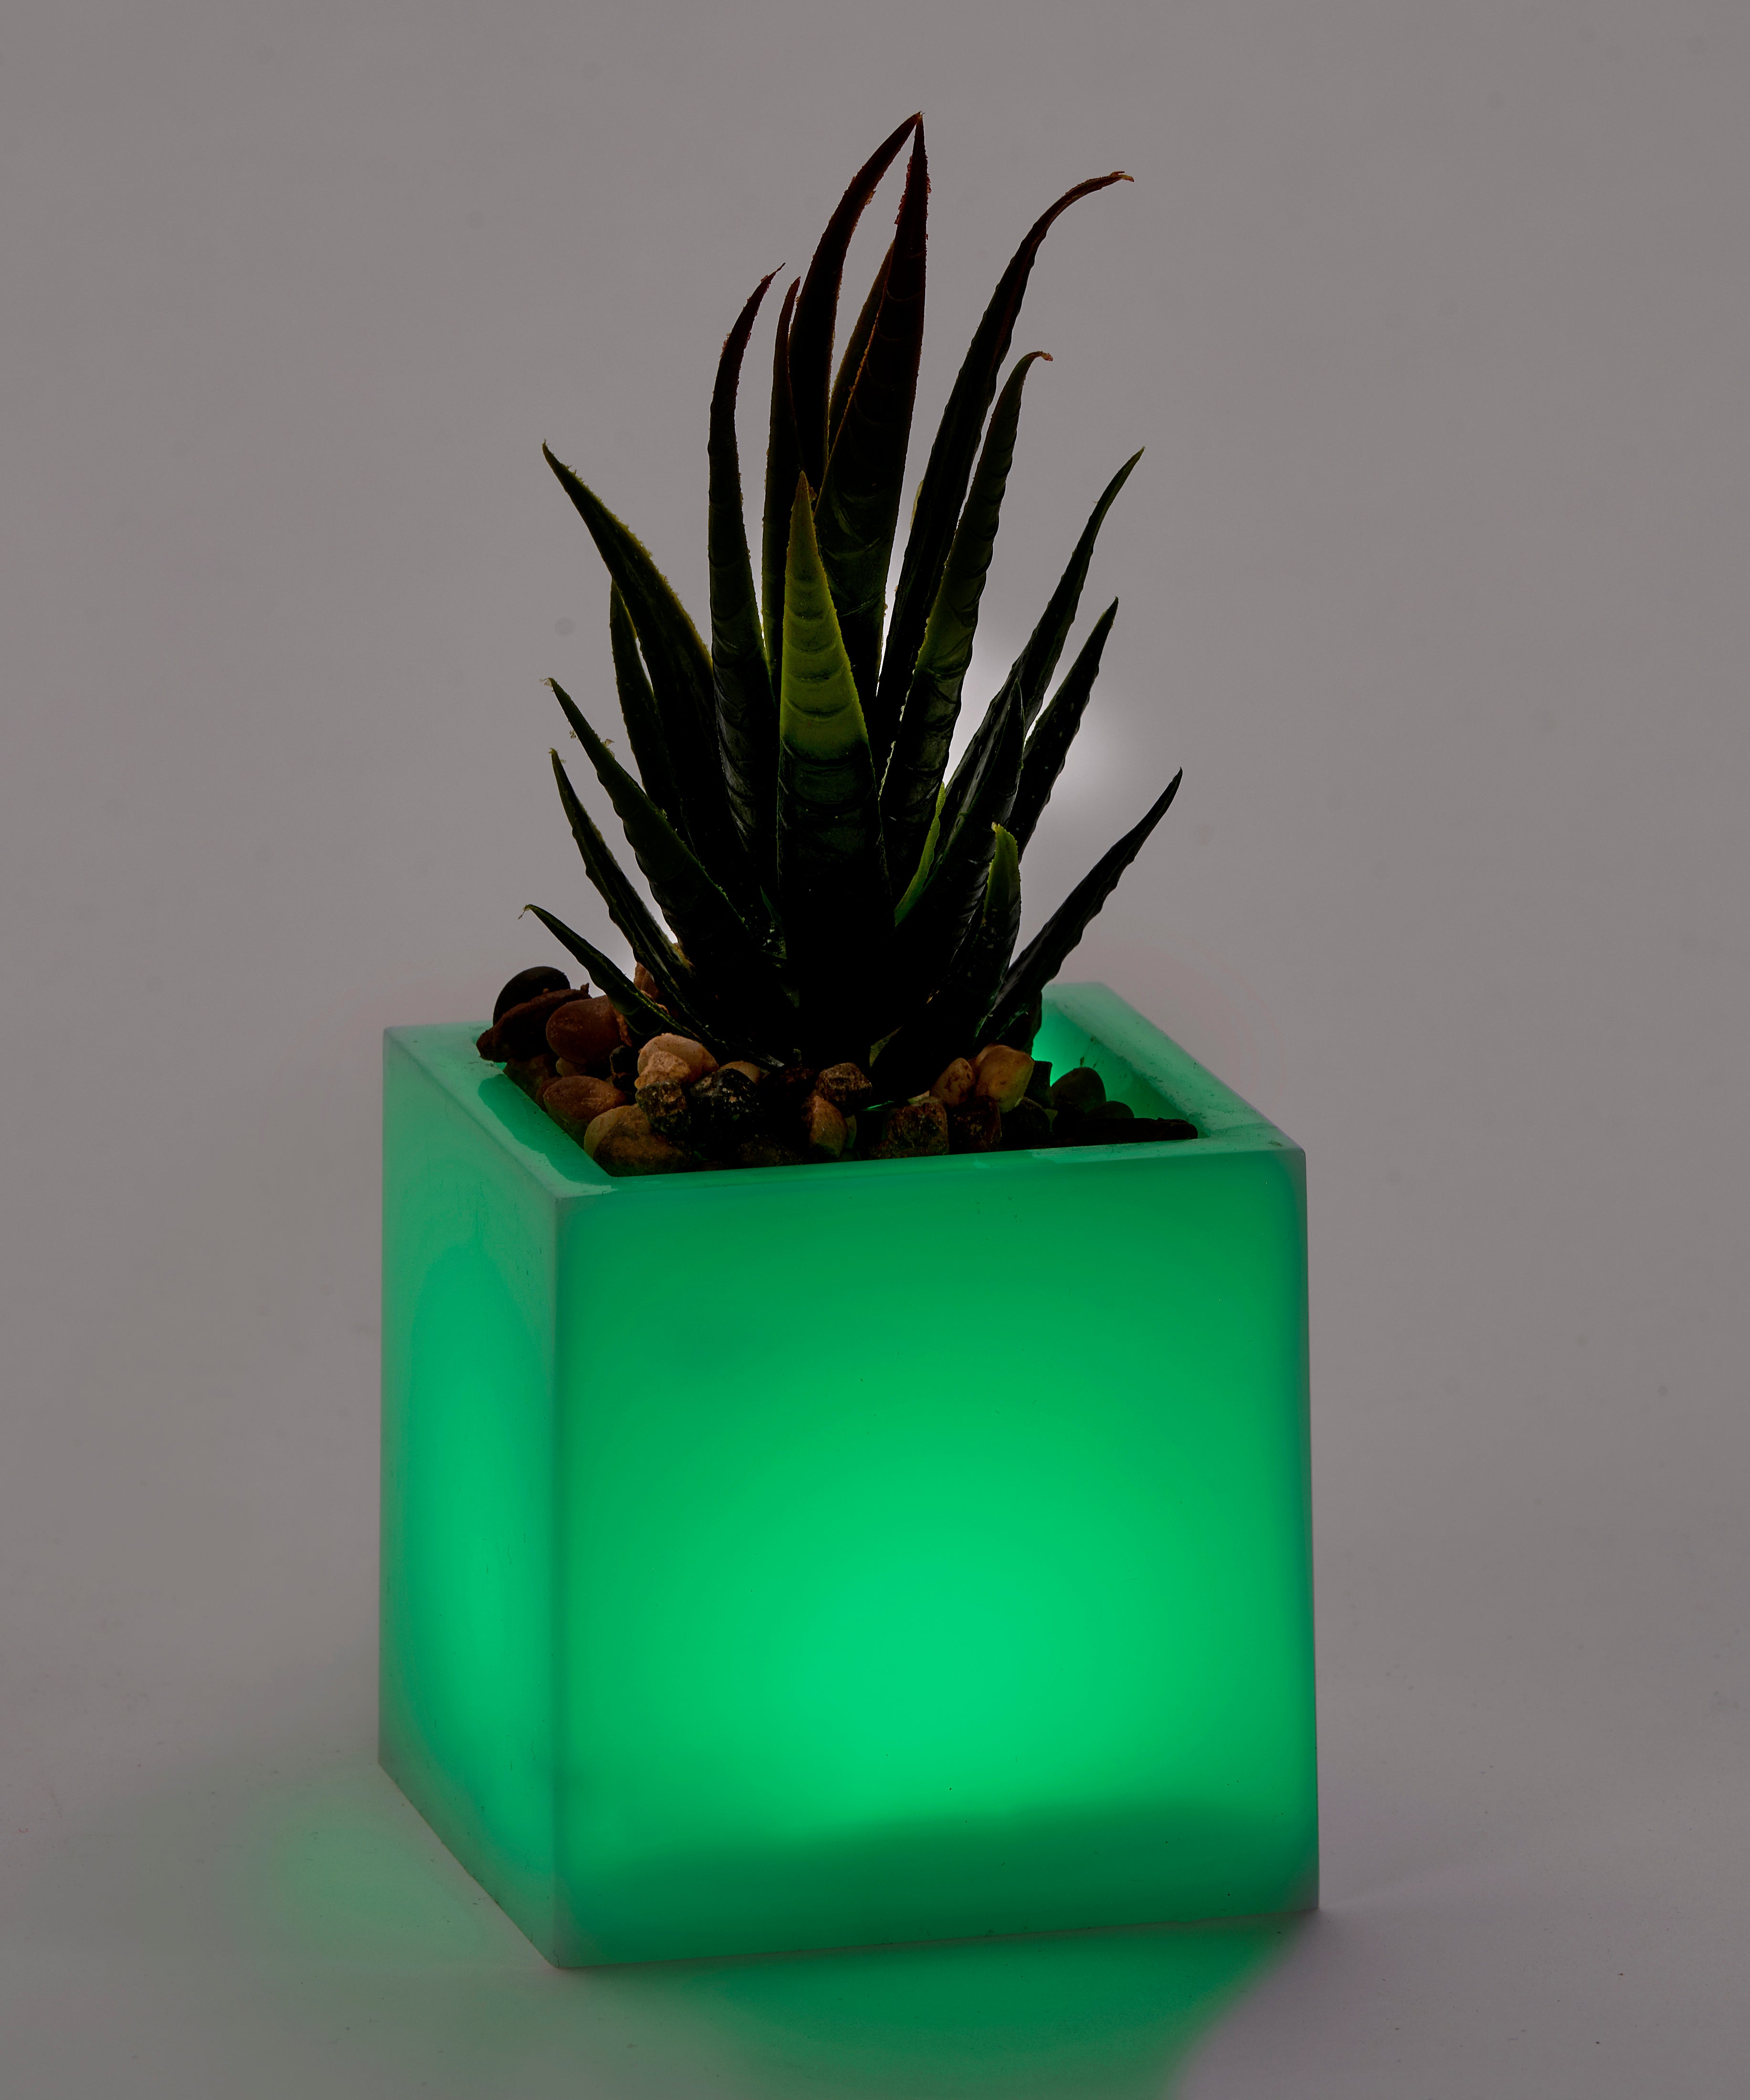 Light-Up Succulent with Color Changing LED